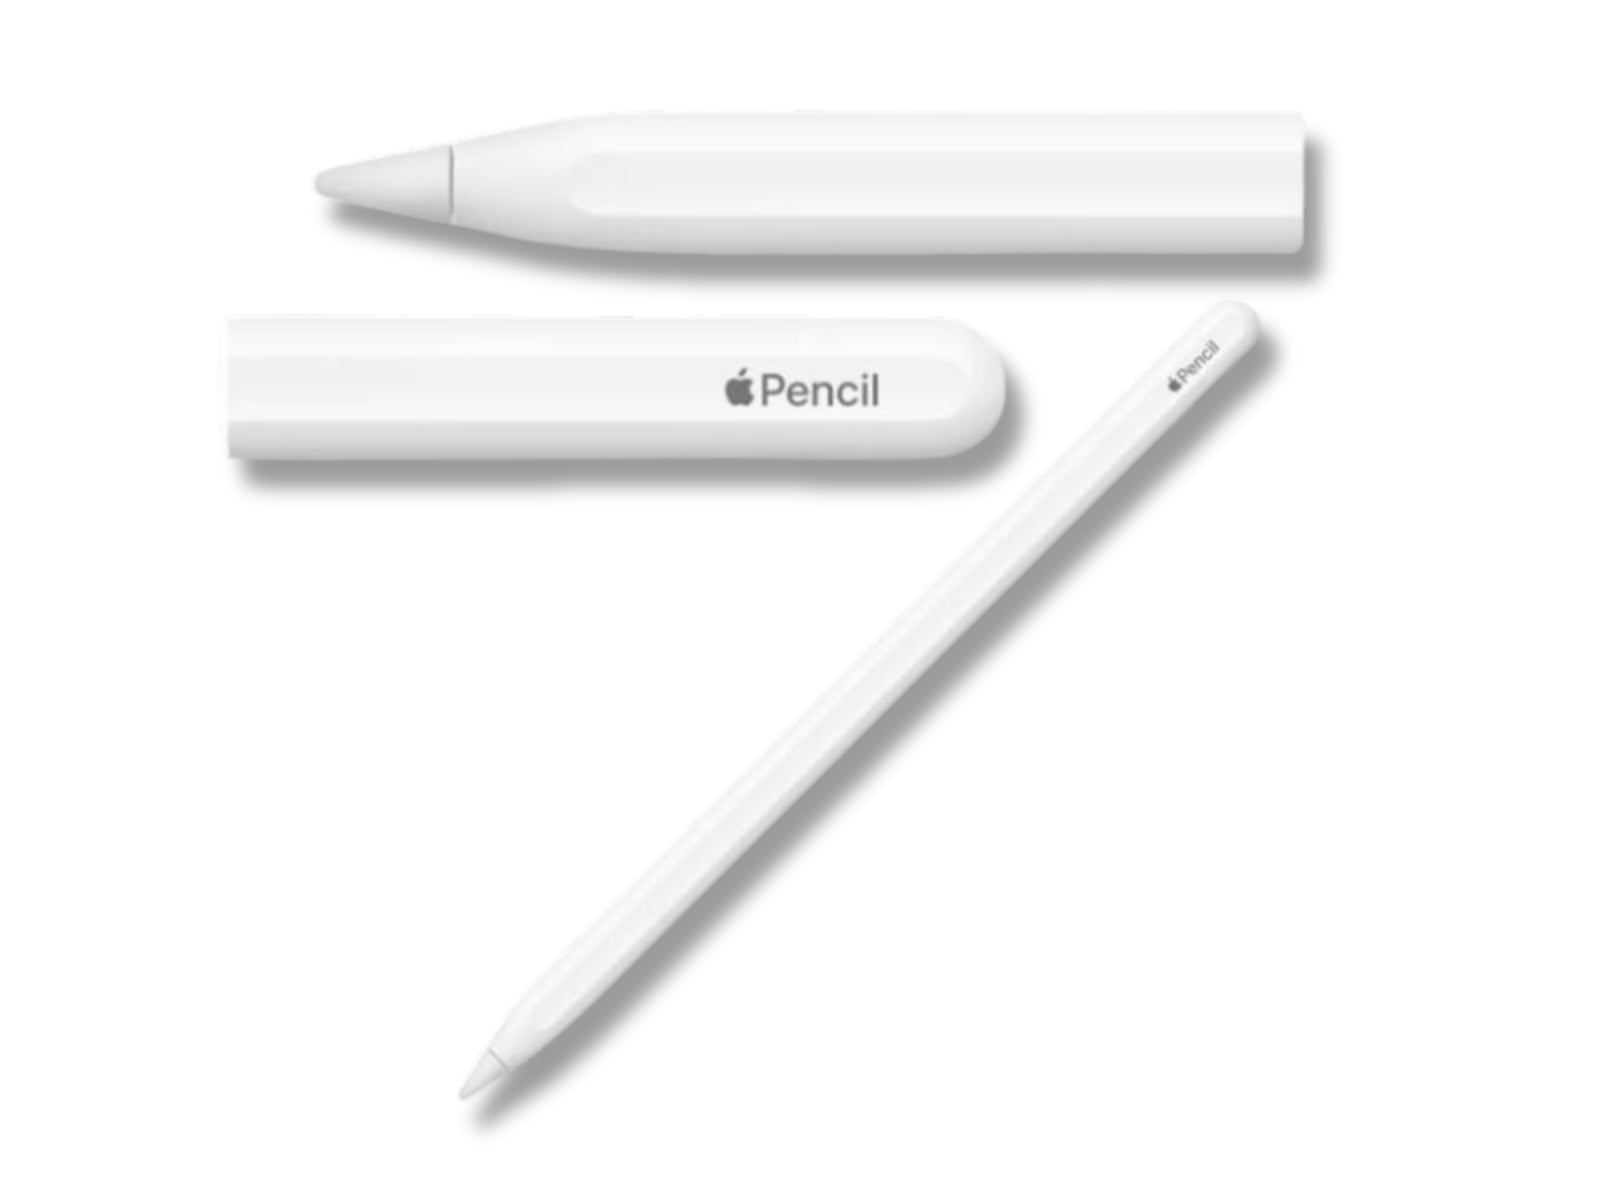 Image shows a close up view of the Apple Pencil 2nd Generation 